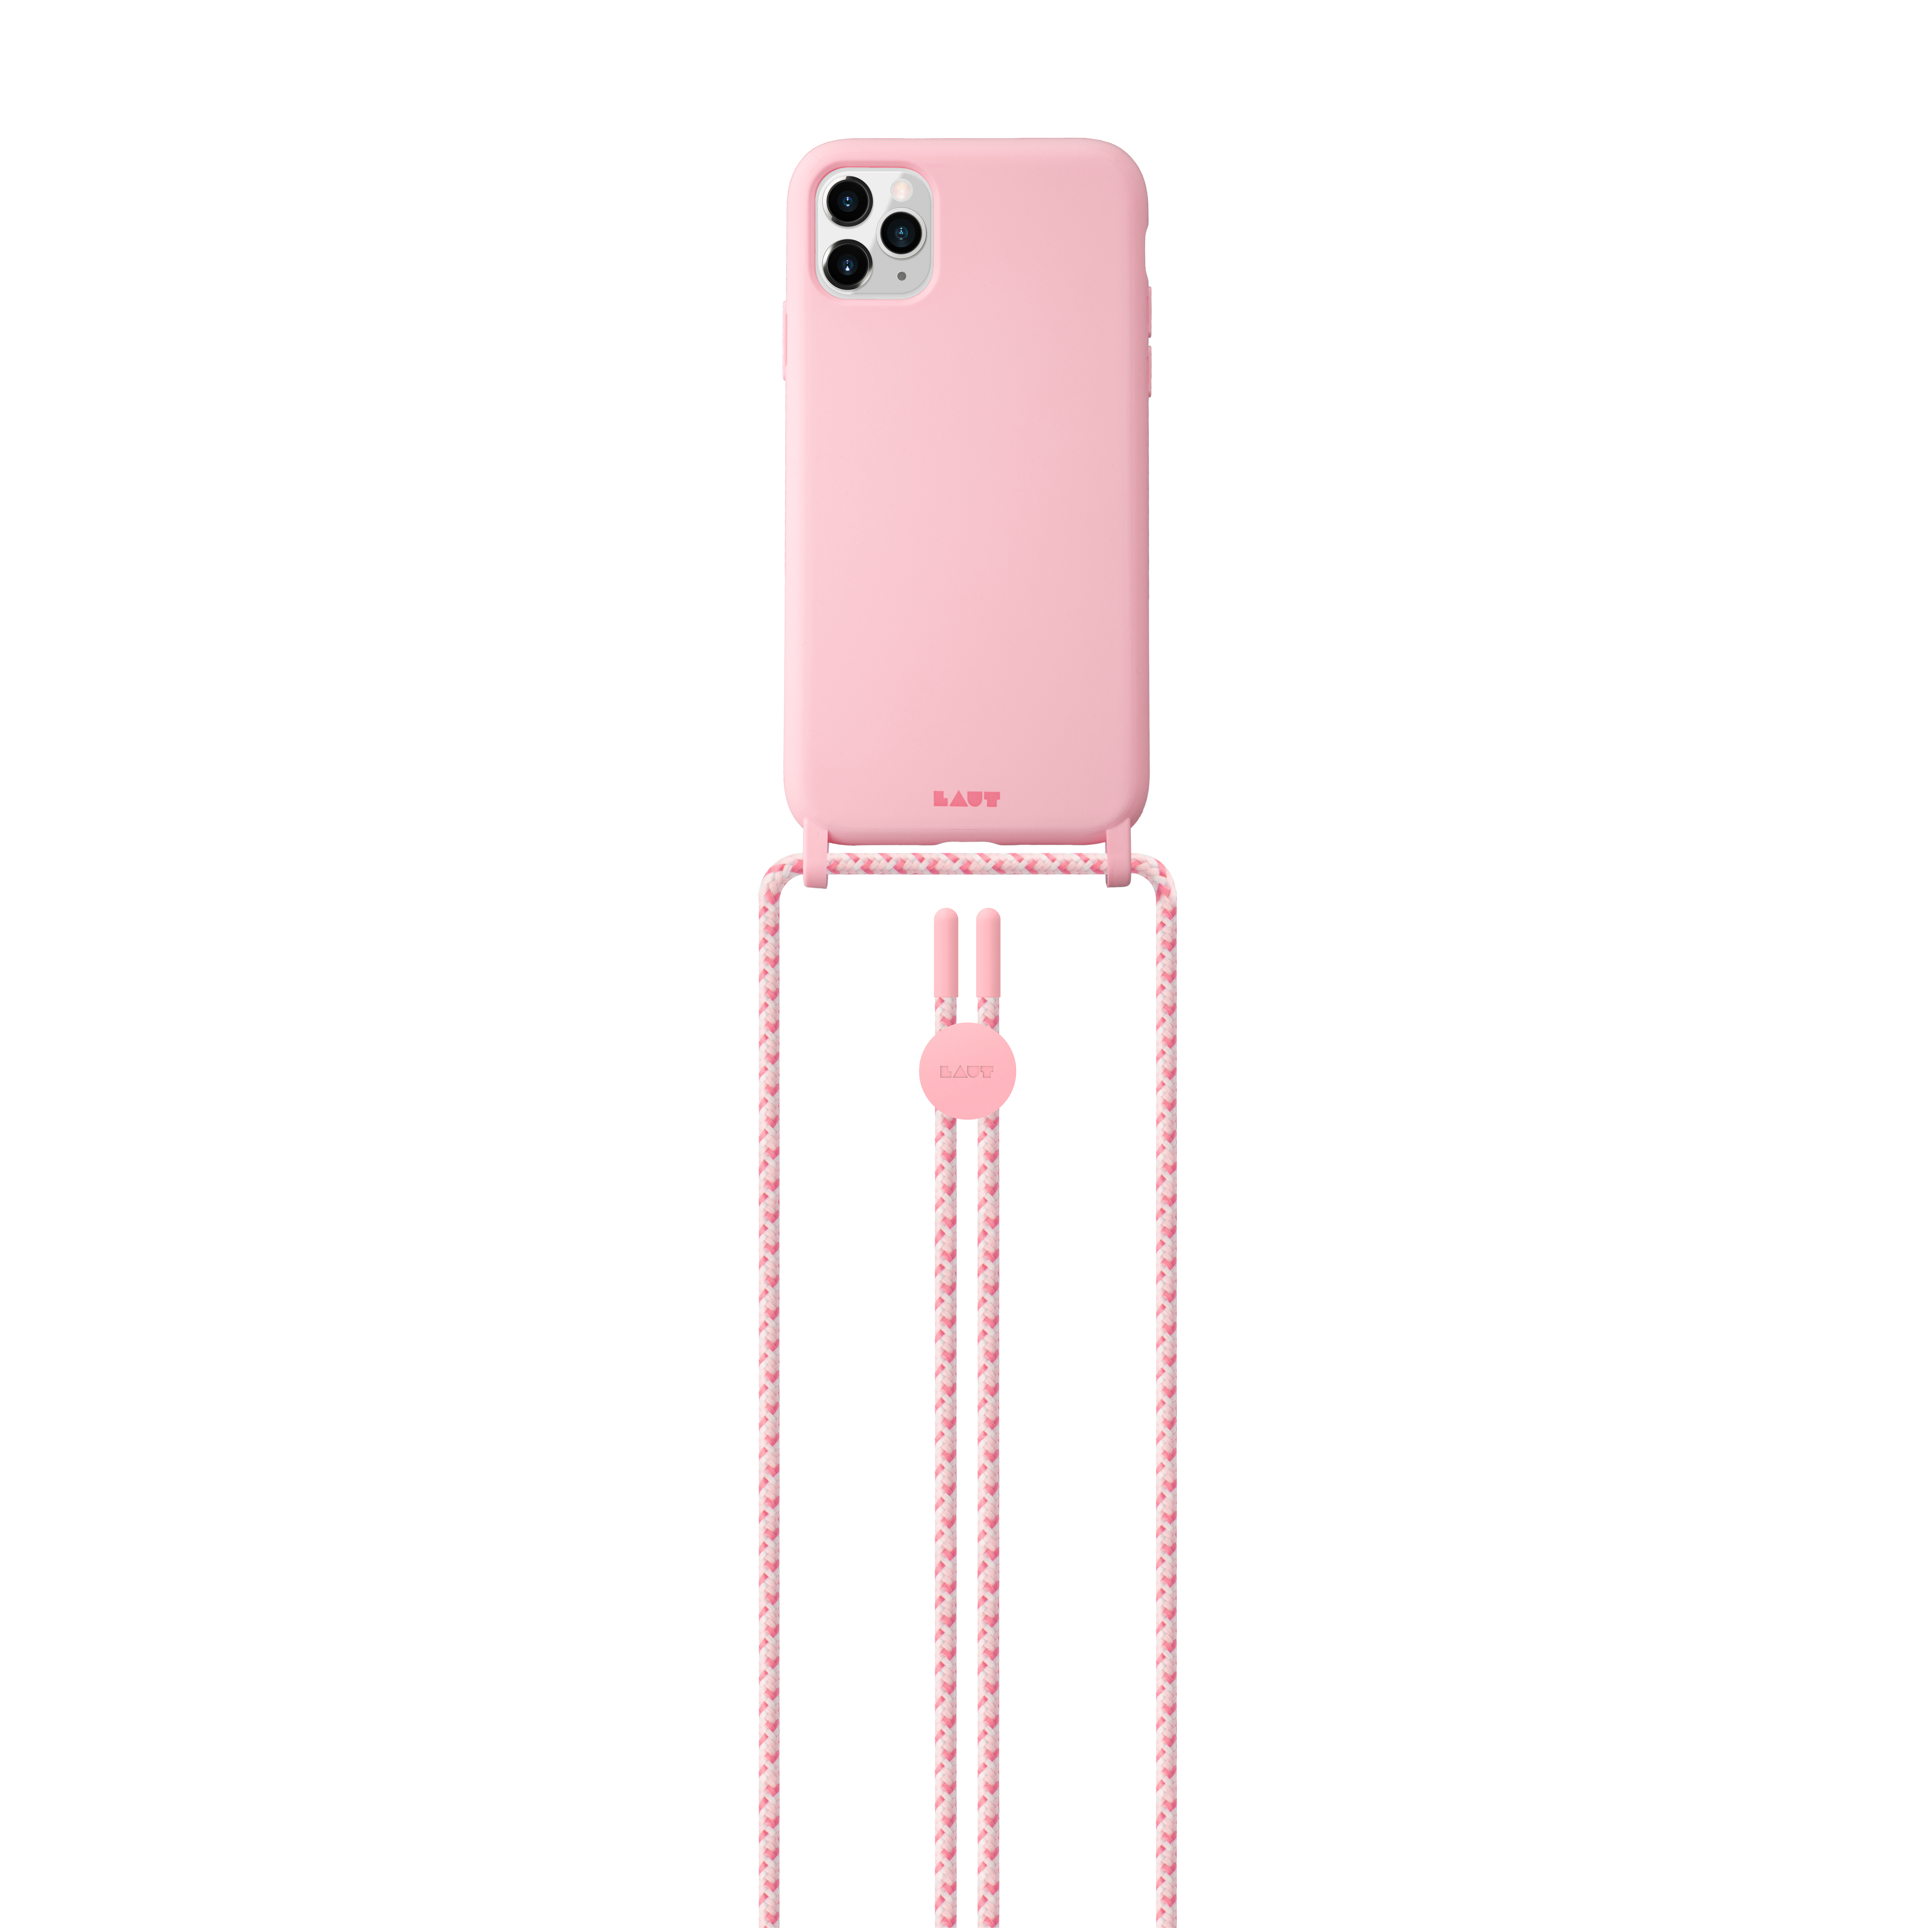 LAUT APPLE, PINK 12 IPHONE Backcover, Pastels (NECKLACE), MINI,